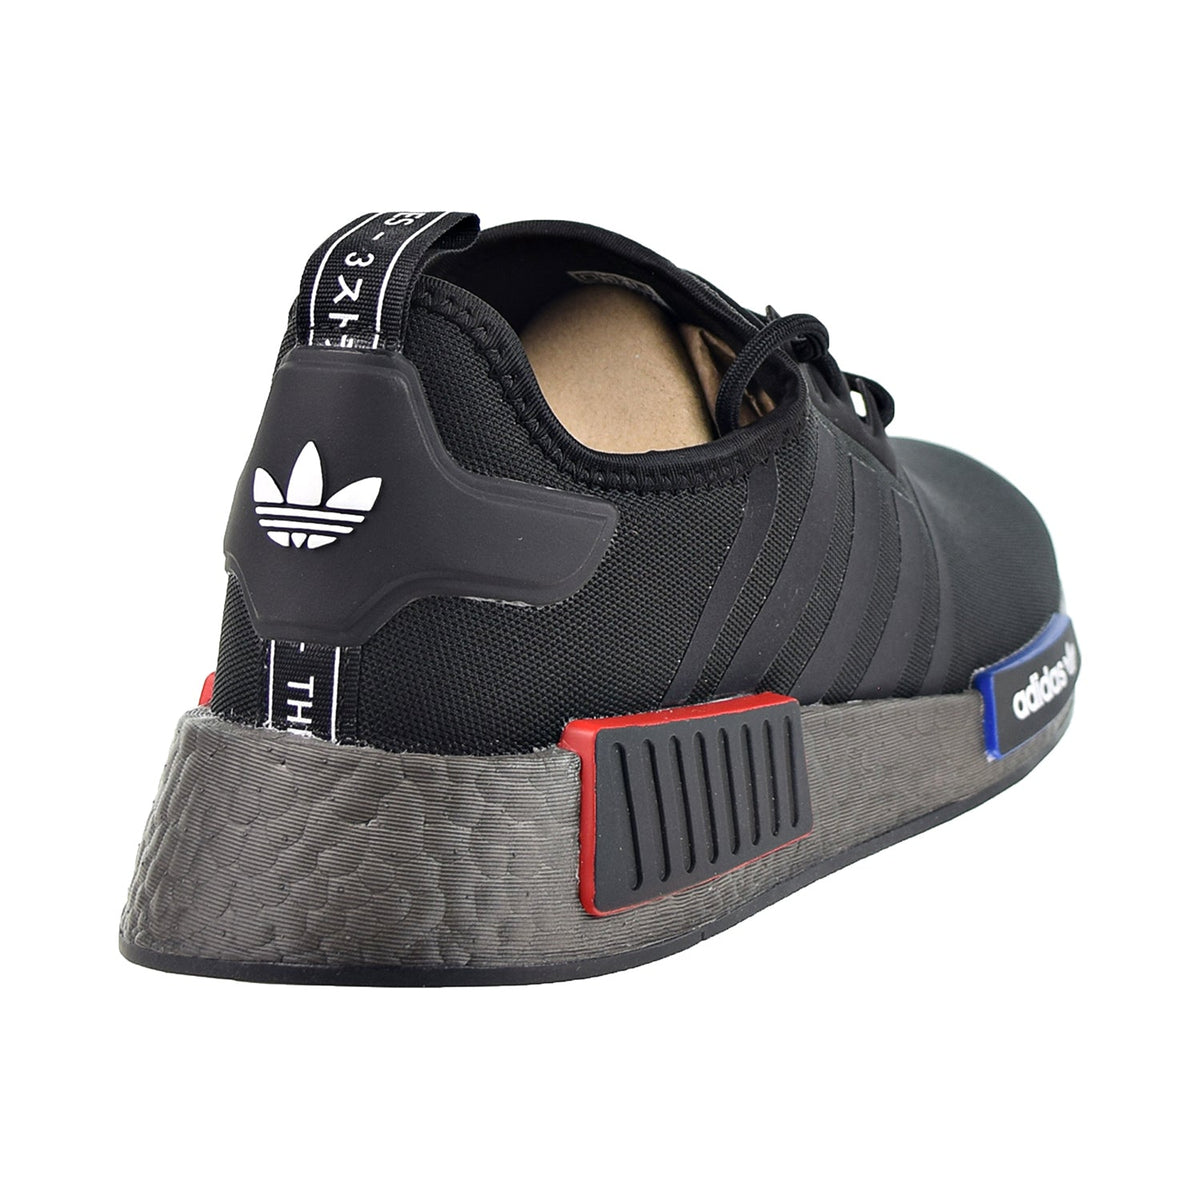 Adidas NMD_R1 Men's Shoes Core Black/Red/Blue/Grey Five – Plaza NY